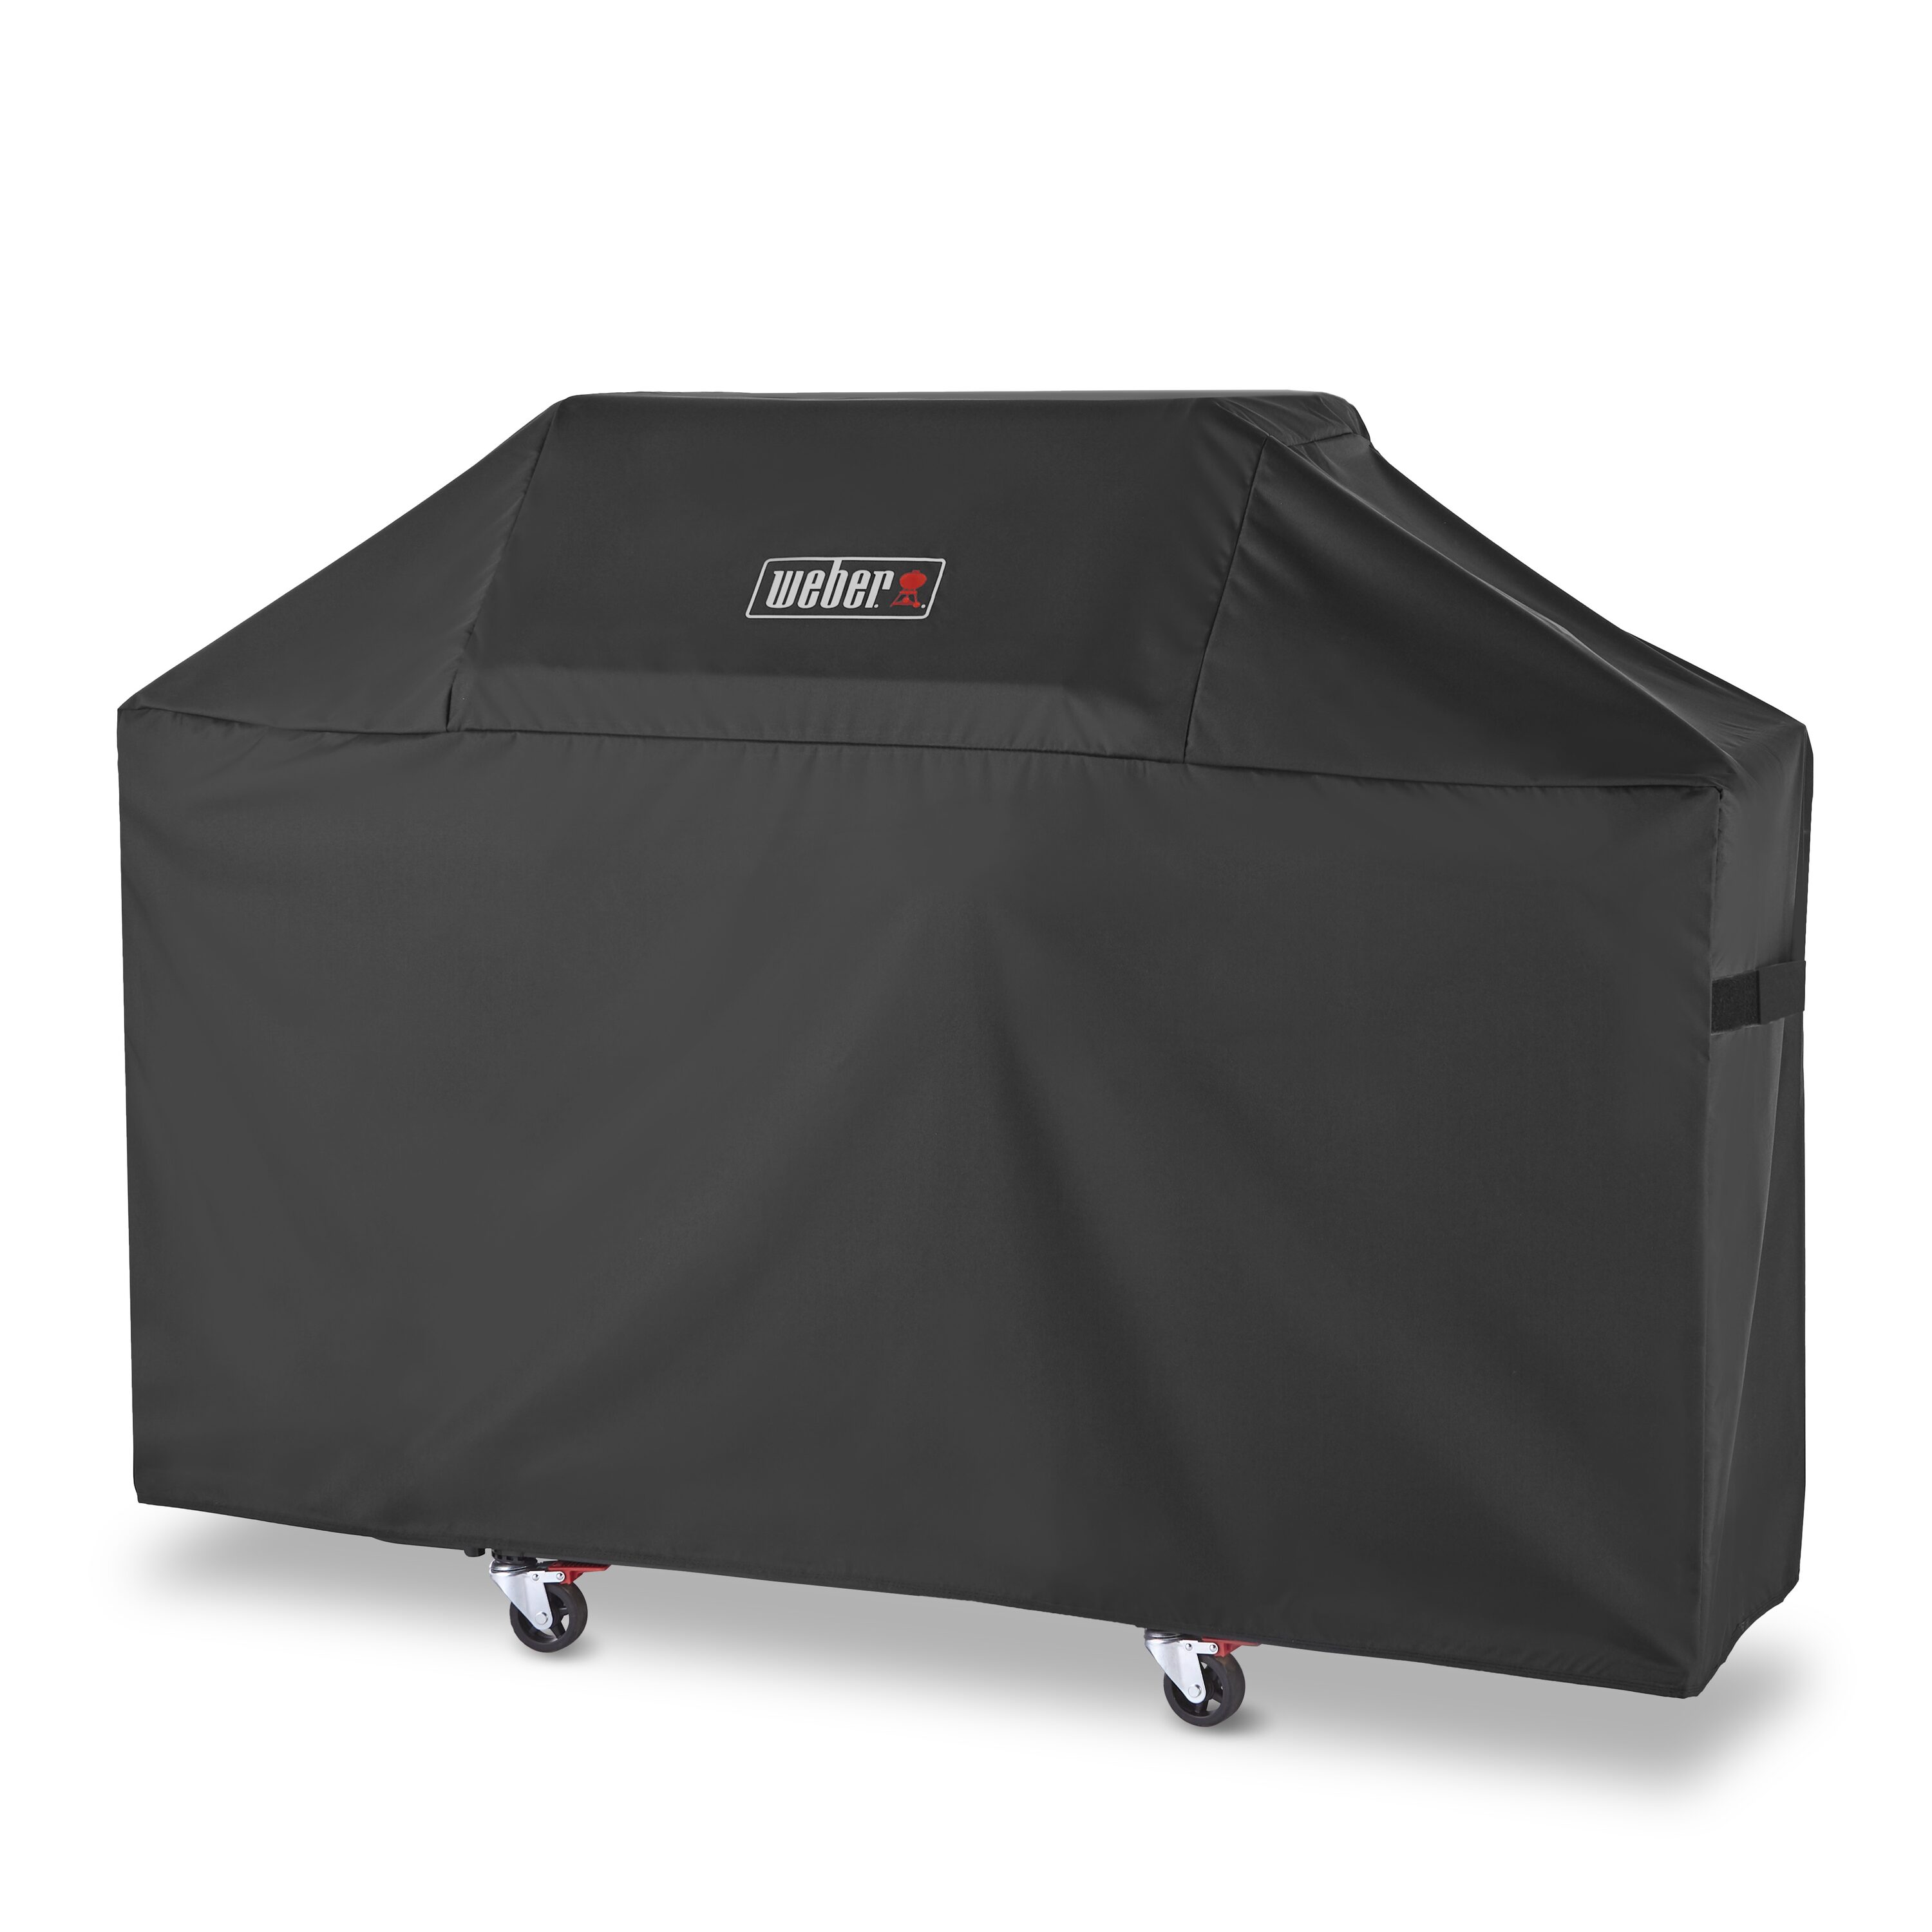 Grill Covers at Lowes.com